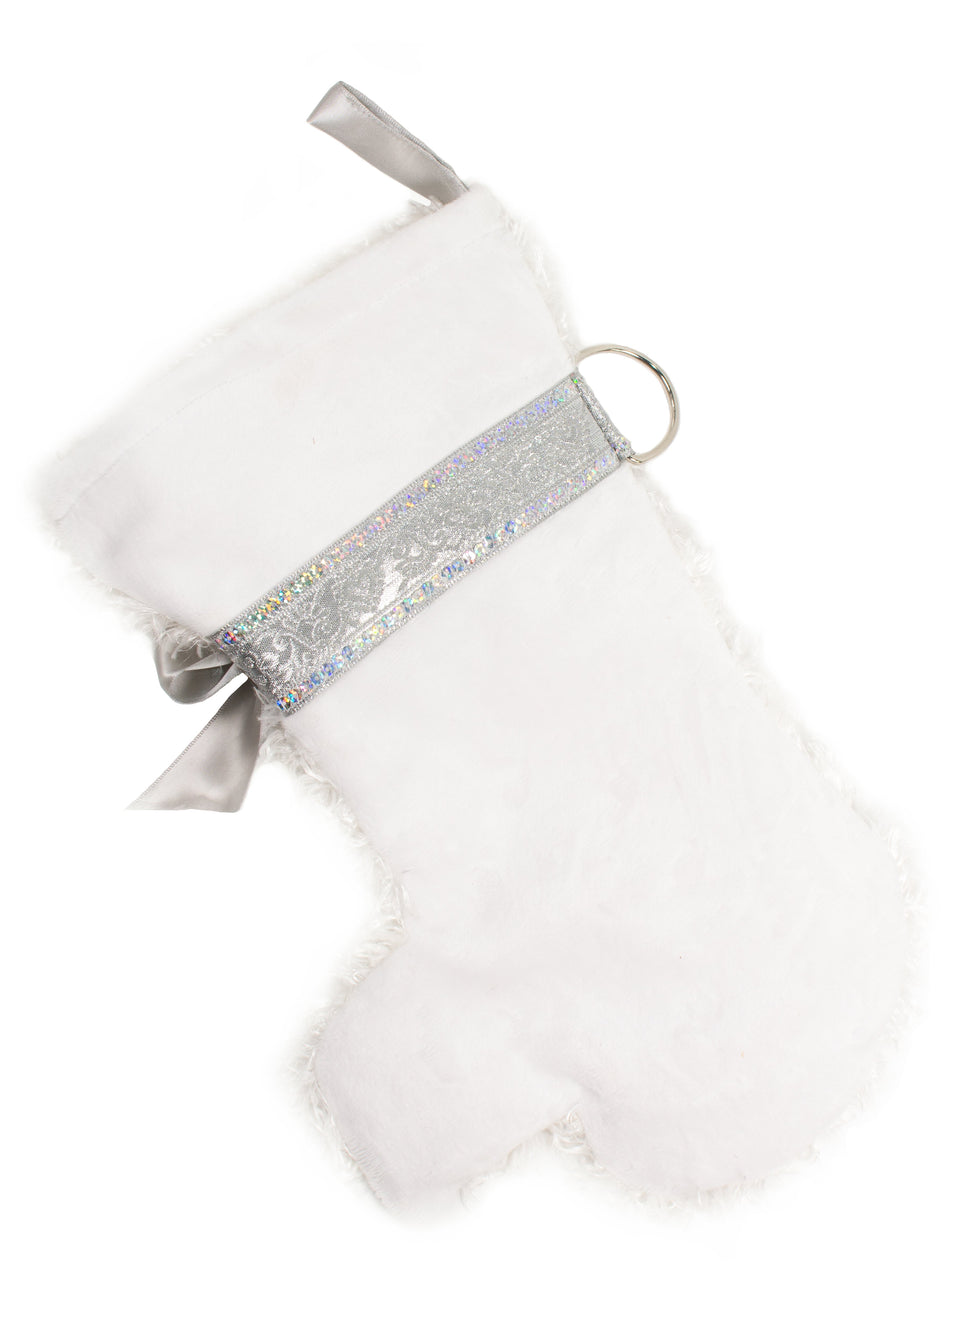 This Snowball Christmas dog stocking is inspired by the Maltese and Bichon Frise and is the perfect gift for stuffing toys and treats into to spoil your fur baby for Christmas, or whatever holiday you celebrate!